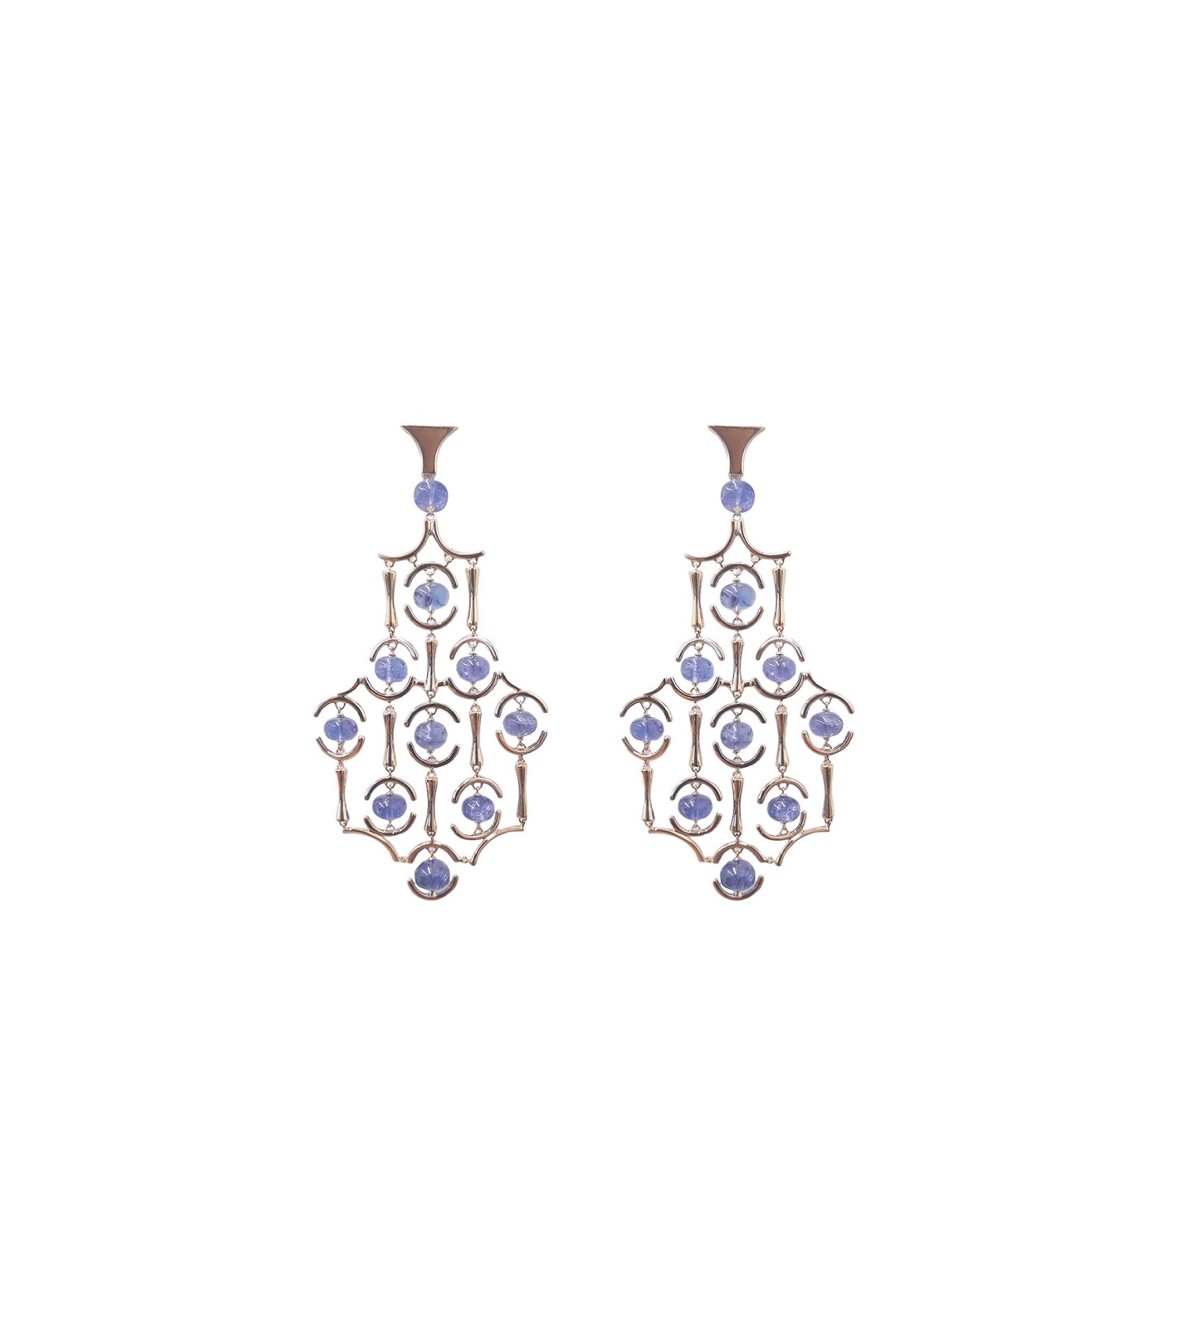 Yellow Gold Earrings with Tanzanite Stones